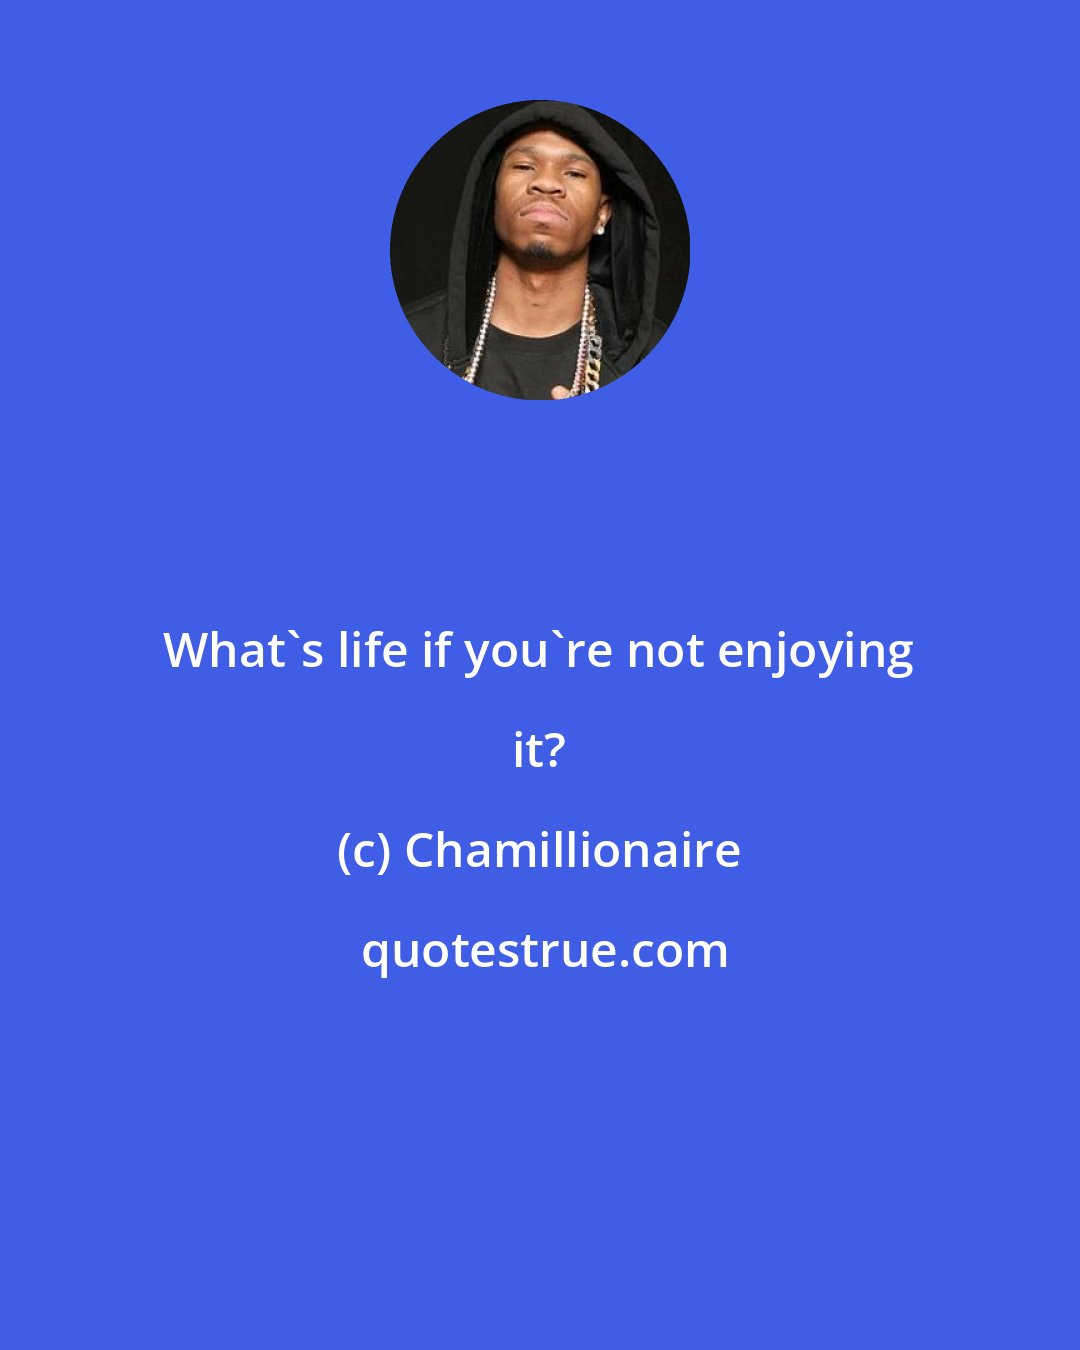 Chamillionaire: What's life if you're not enjoying it?